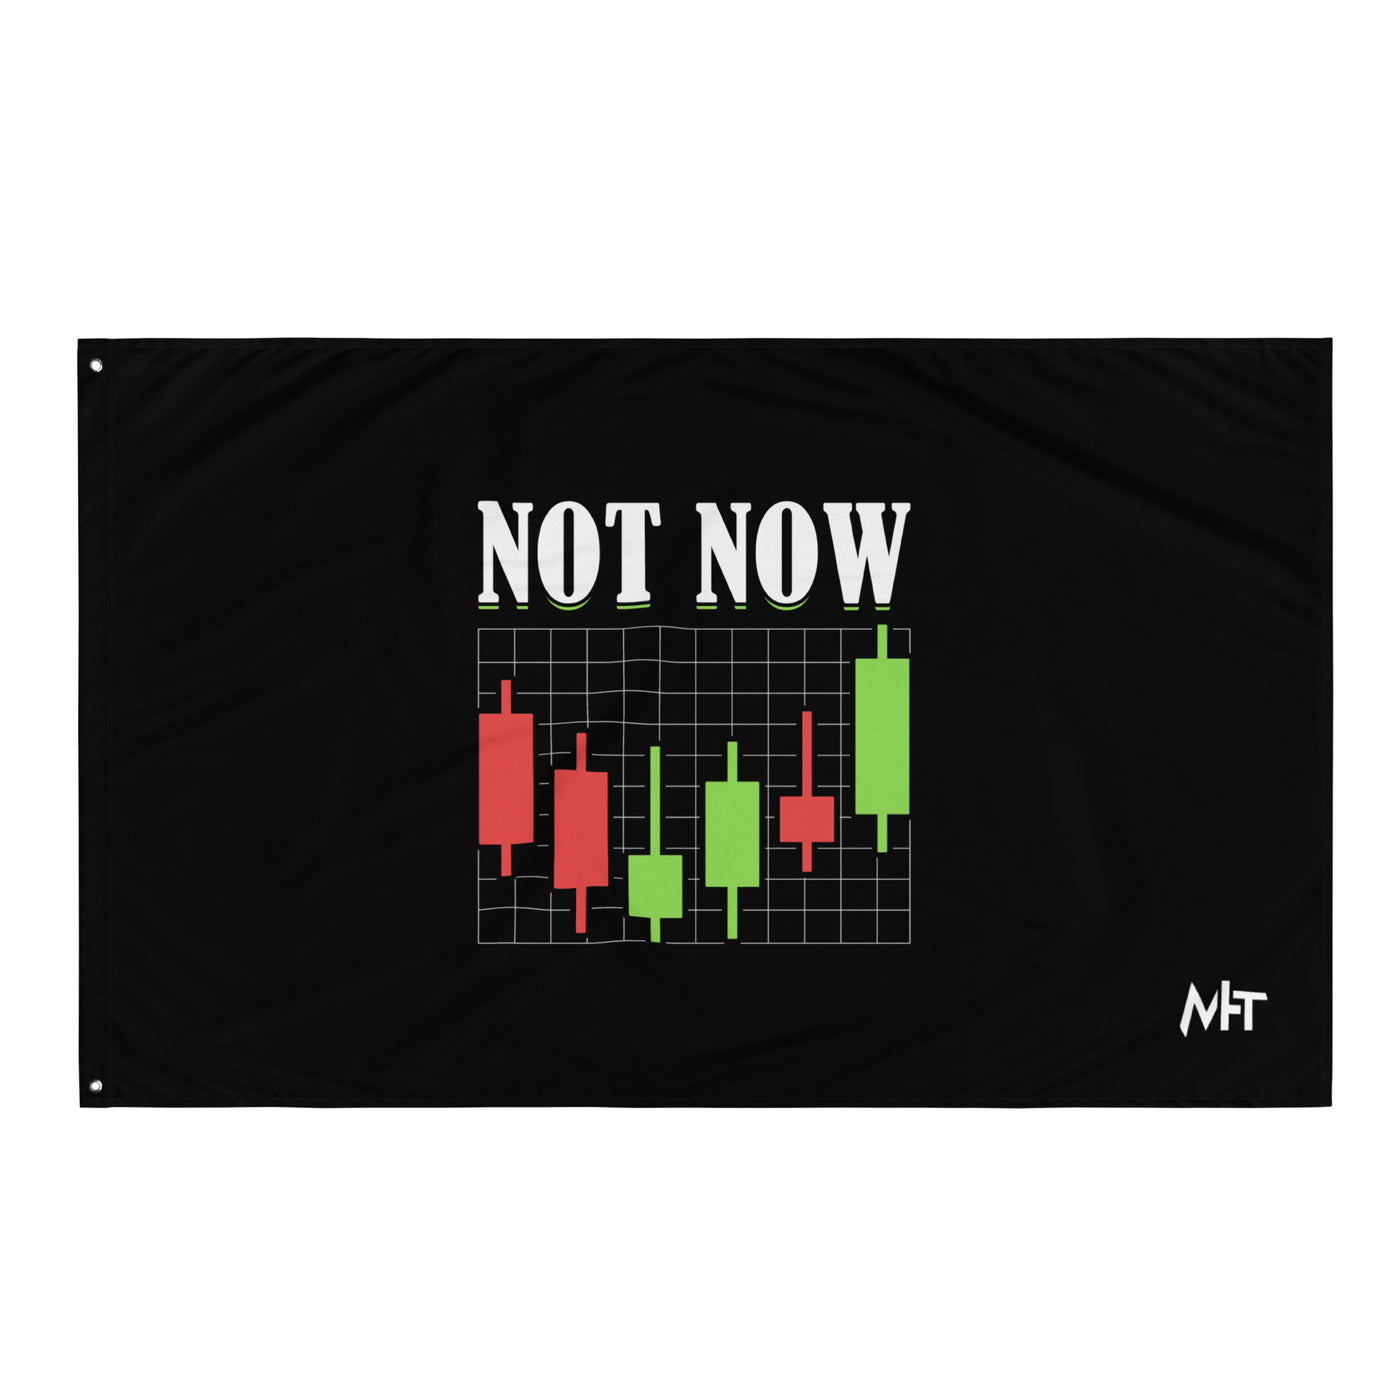 Not Now - Flag